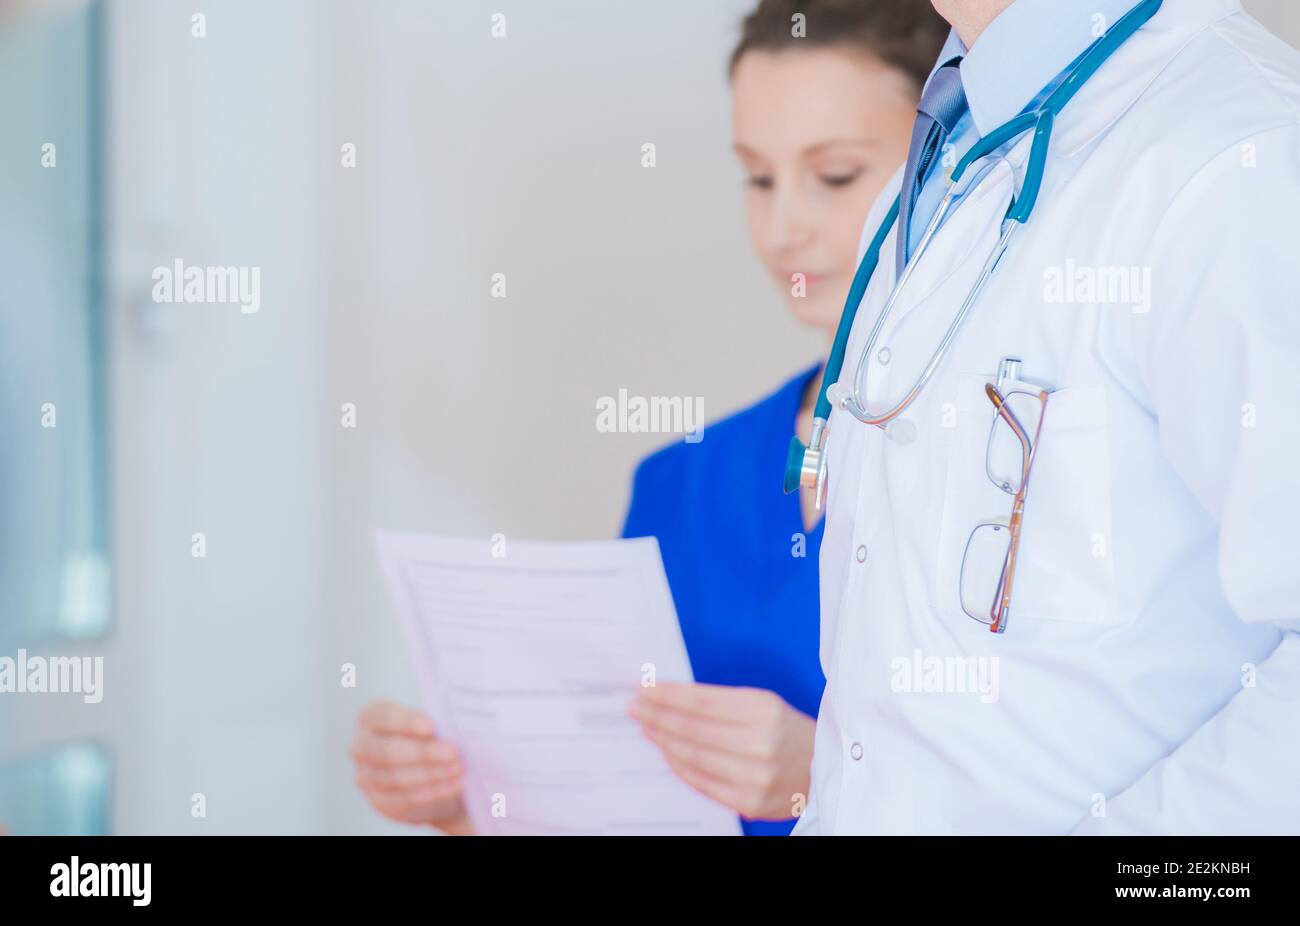 Healthcare Professionals Theme. Medical Personel Inside Hospital Hallway Close Up. Stock Photo